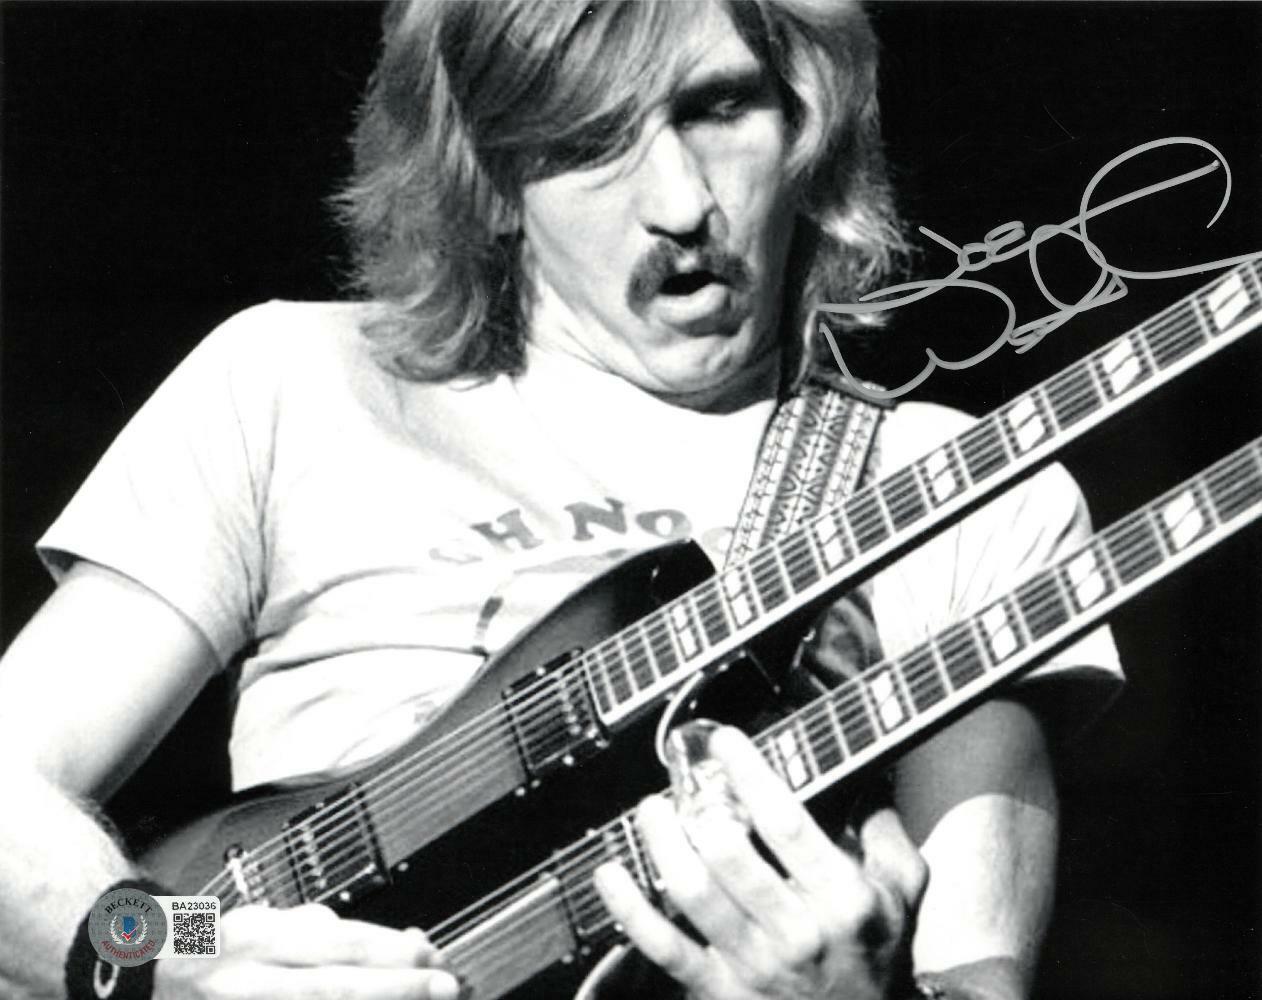 Joe Walsh Signed Eagles In Concert Autographed 8x10 B/W Photo Poster painting BECKETT #BA23036